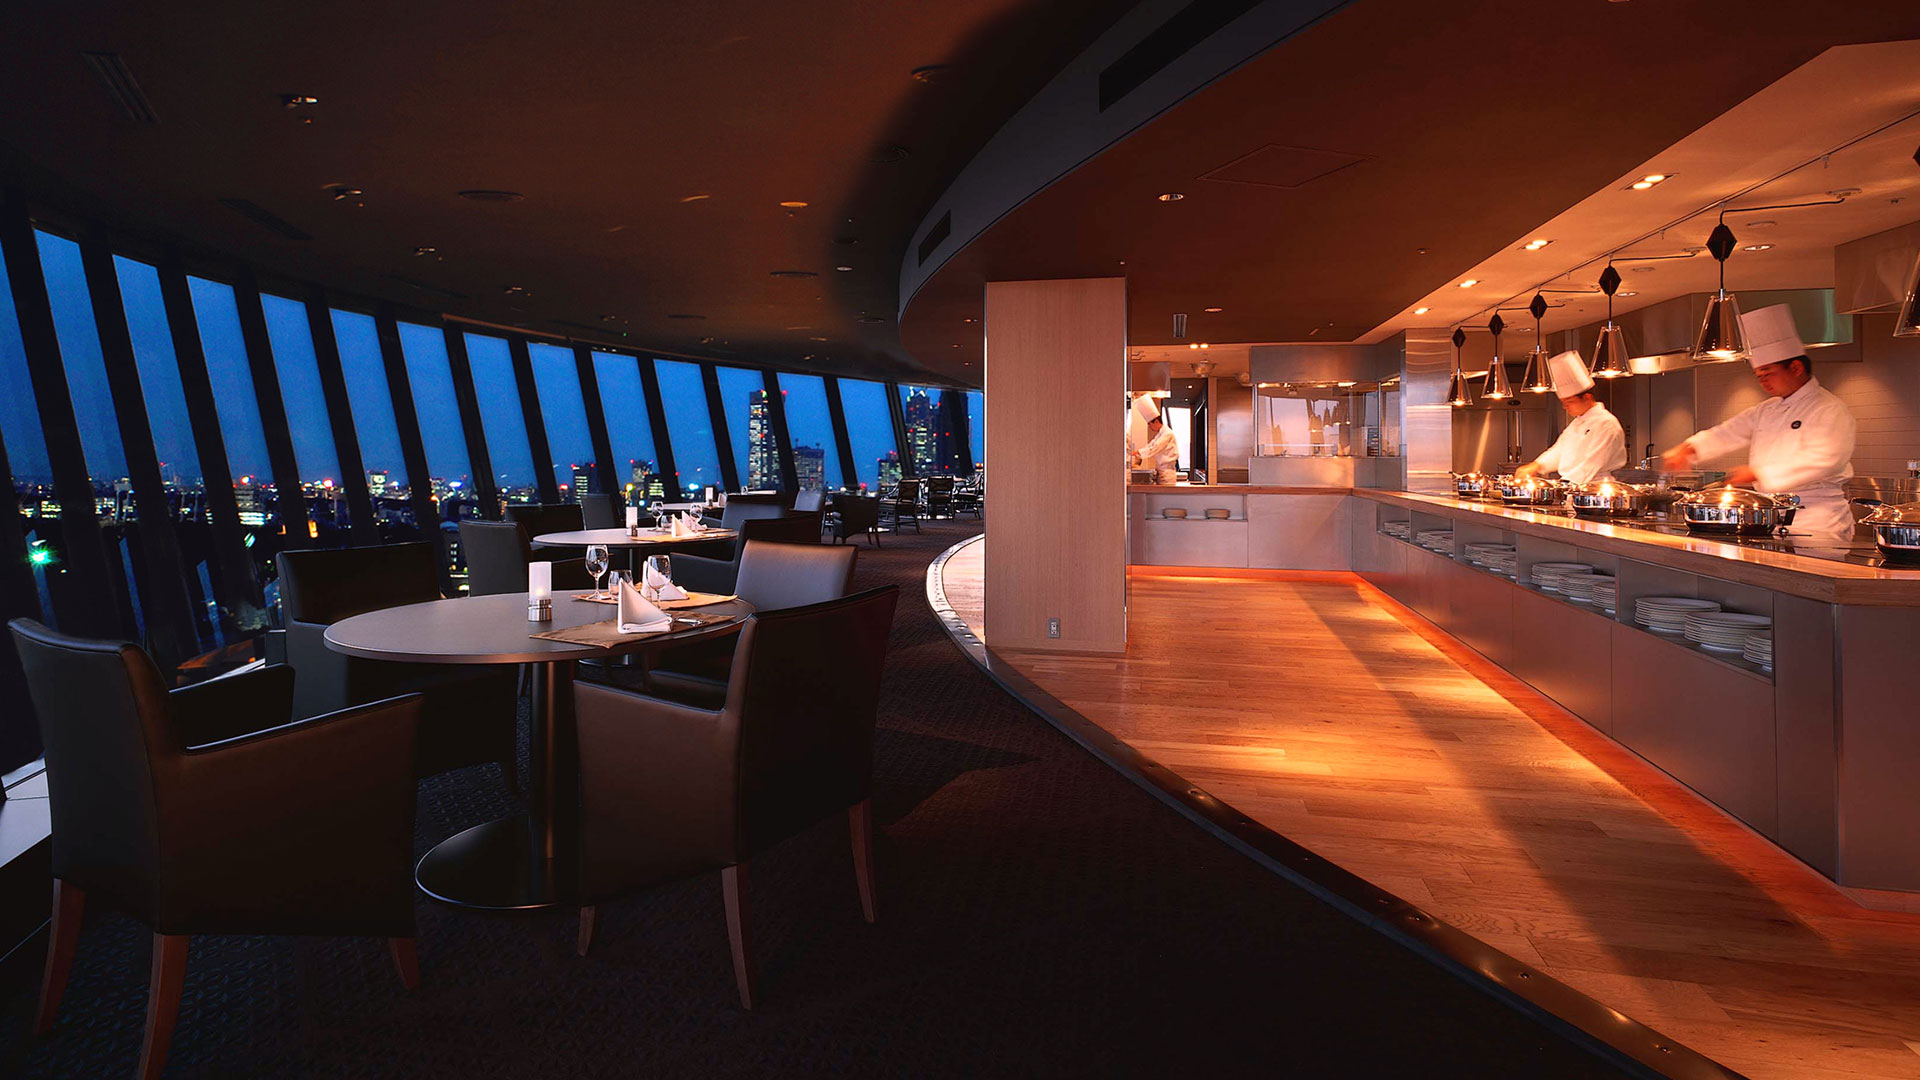 VIEW & DINING THE SKY